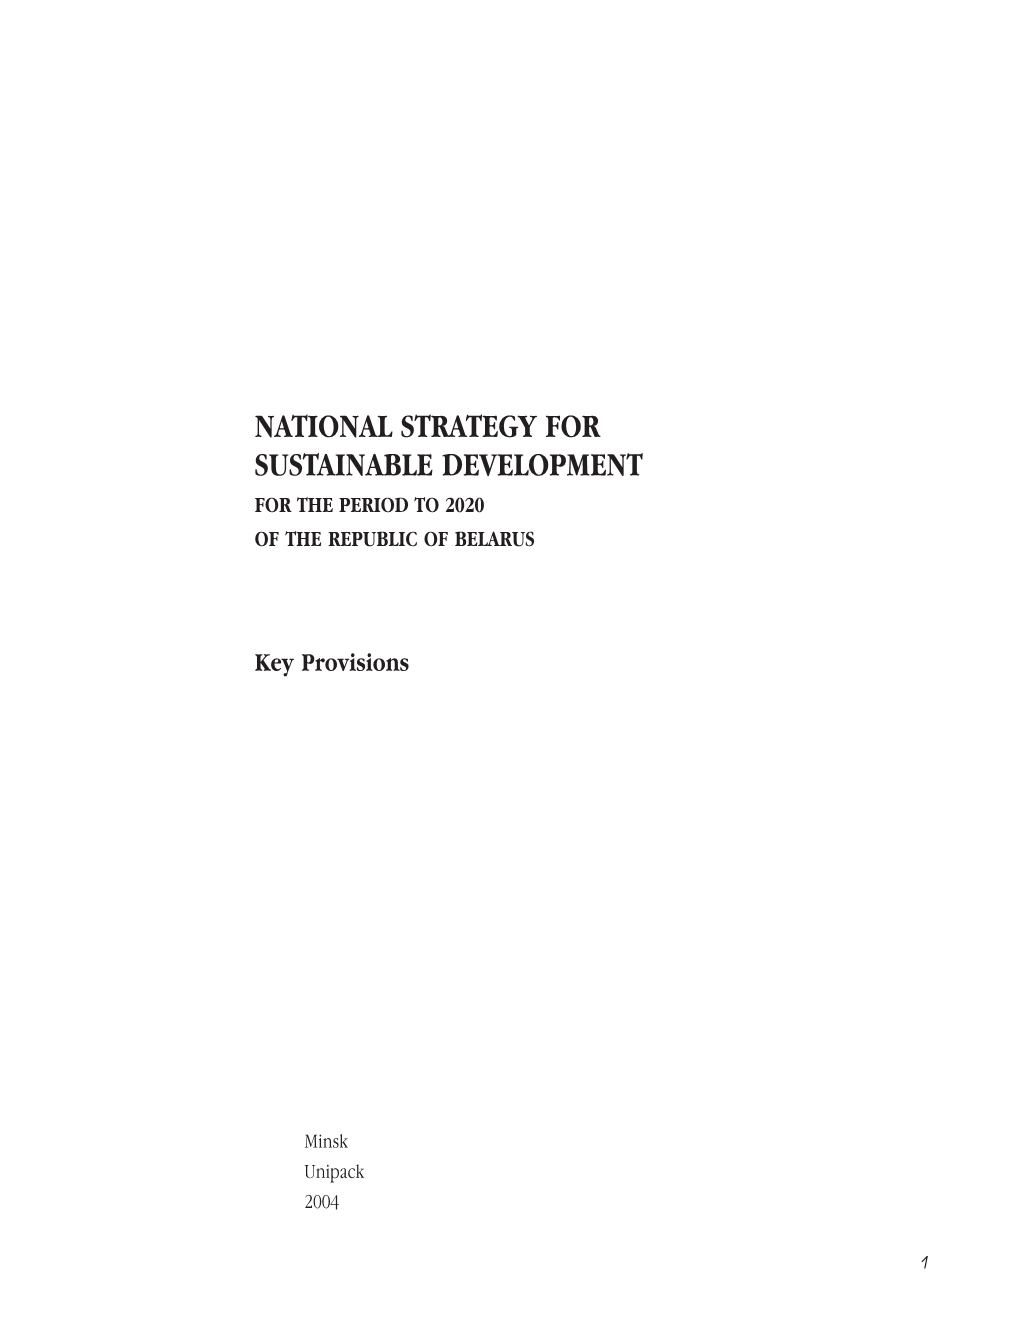 National Strategy for Sustainable Development for the Period to 2020 of the Republic of Belarus